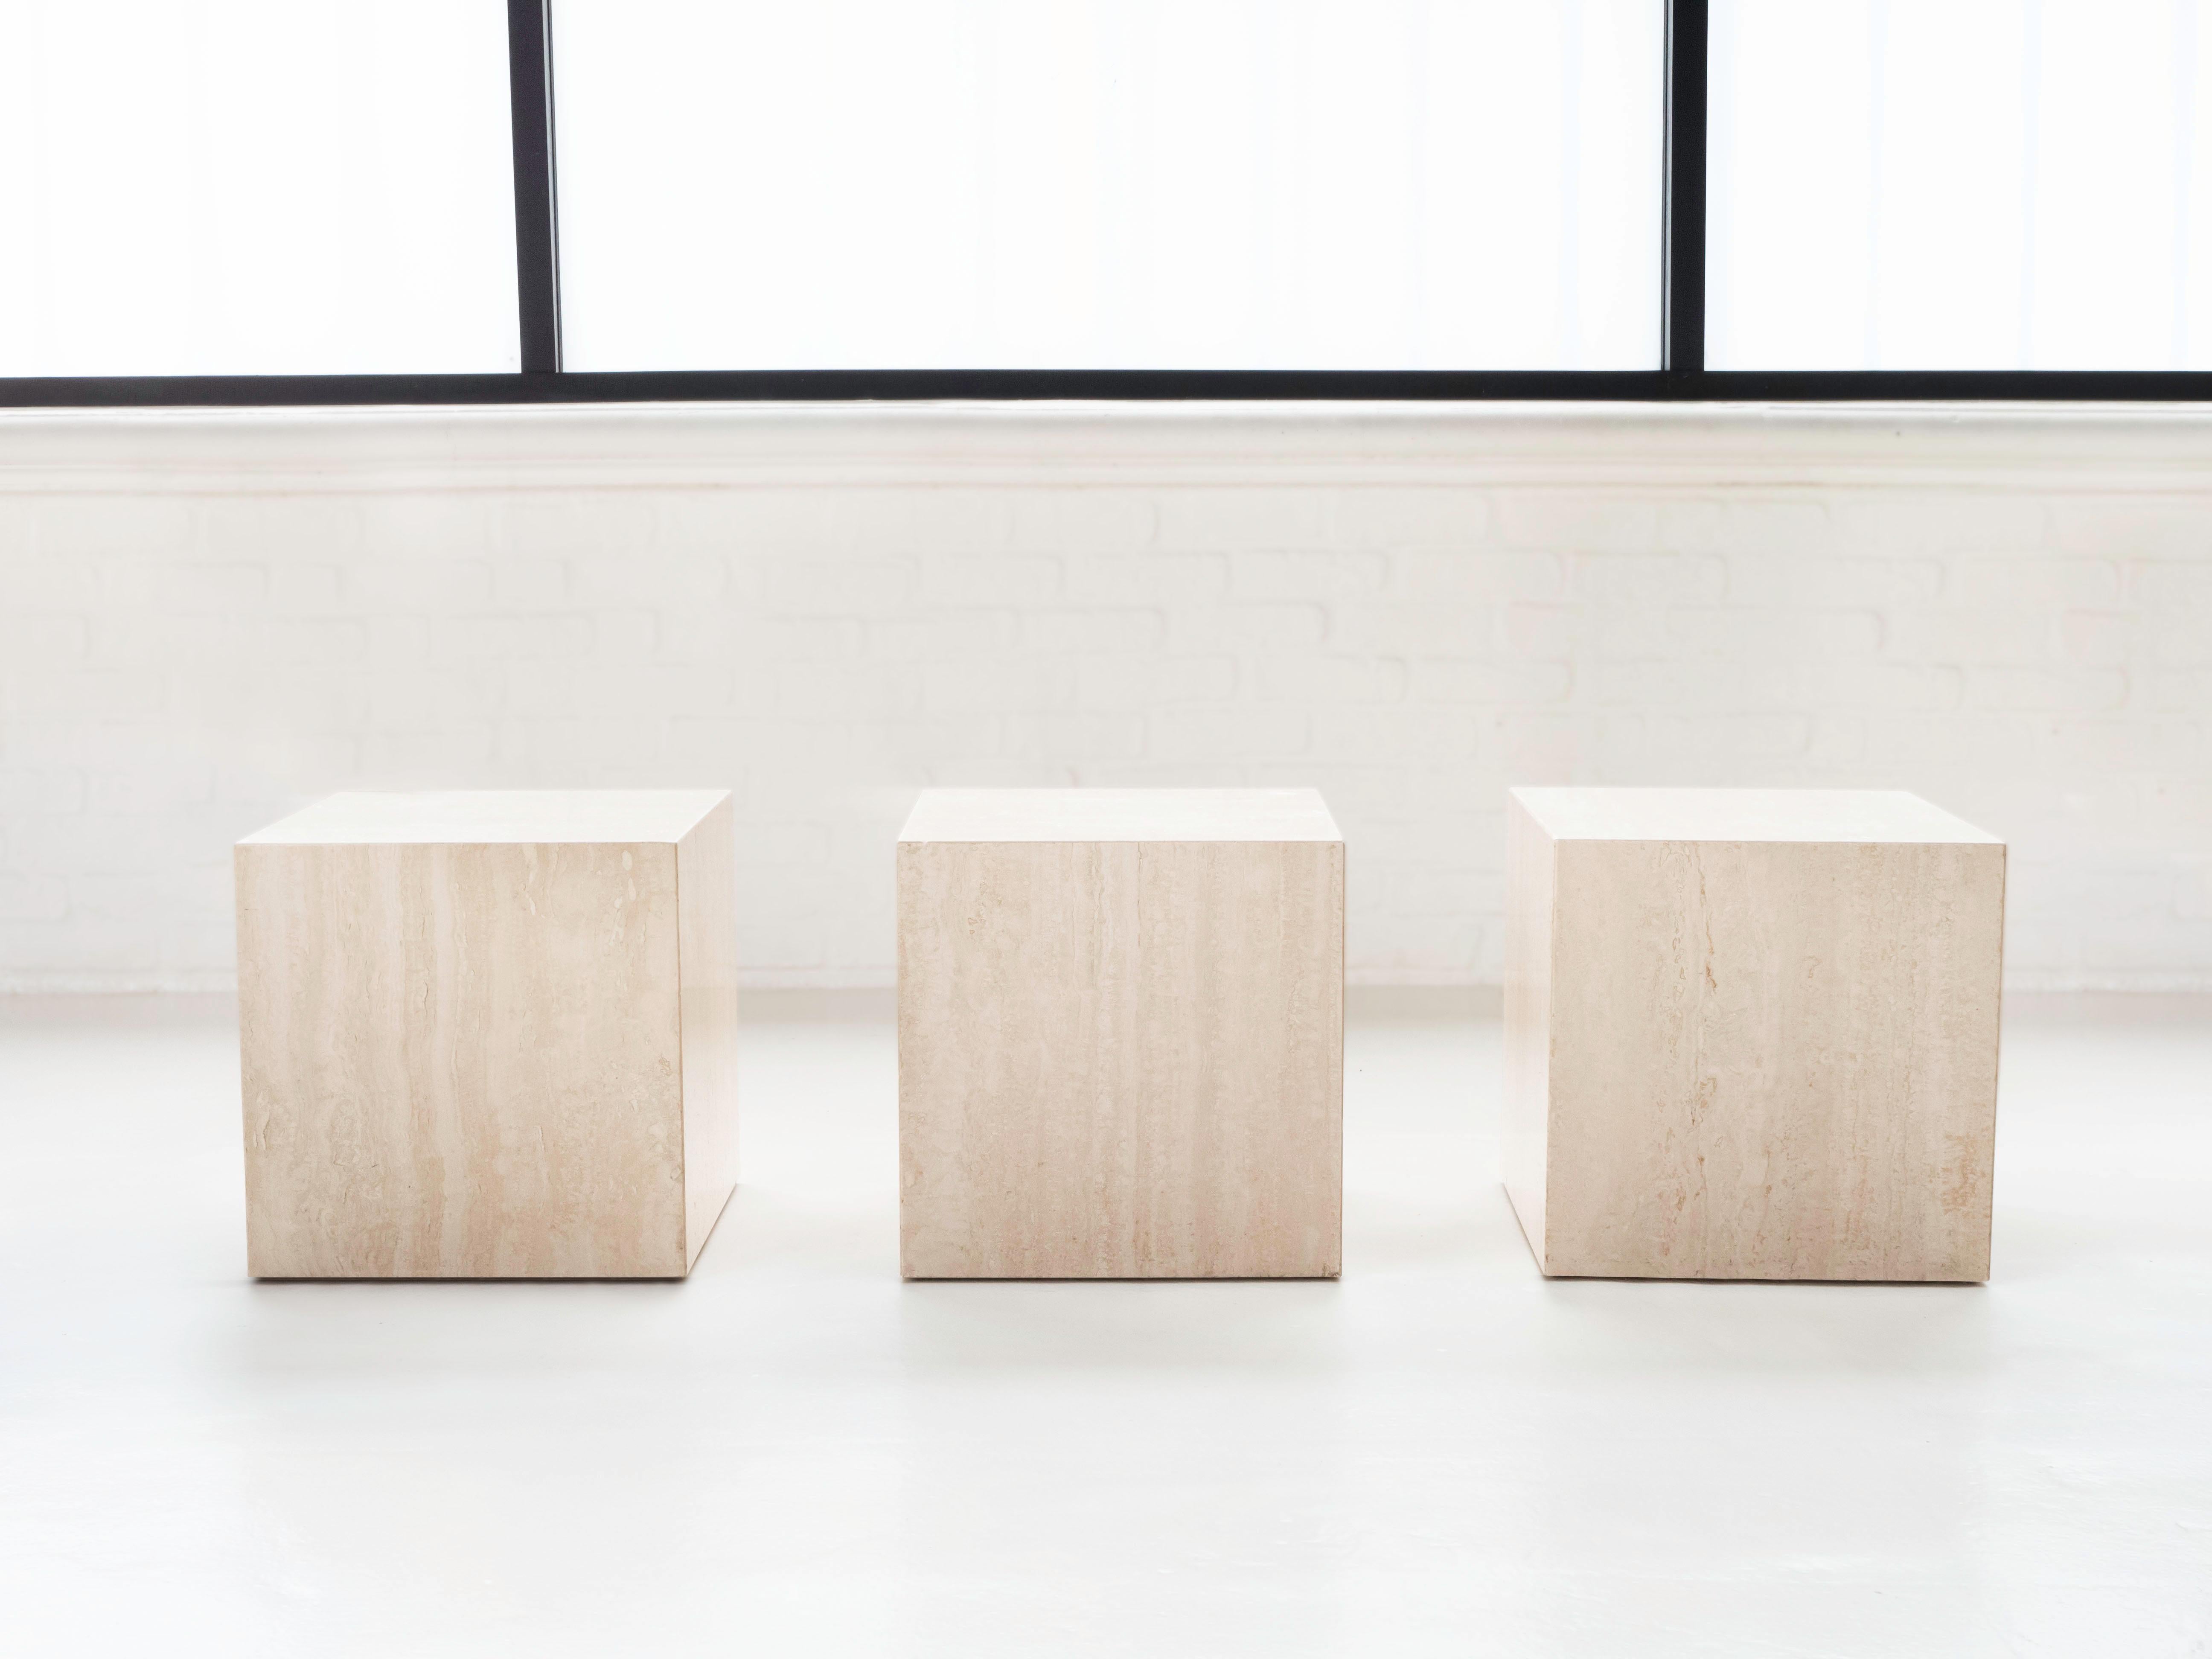 Italian travertine set of 3 cube side tables, circa 1970's.  Versatile pieces that can be combined to create one long continuous section, or spread apart for use as individual tables.  All in good original condition, some light chipping on a few